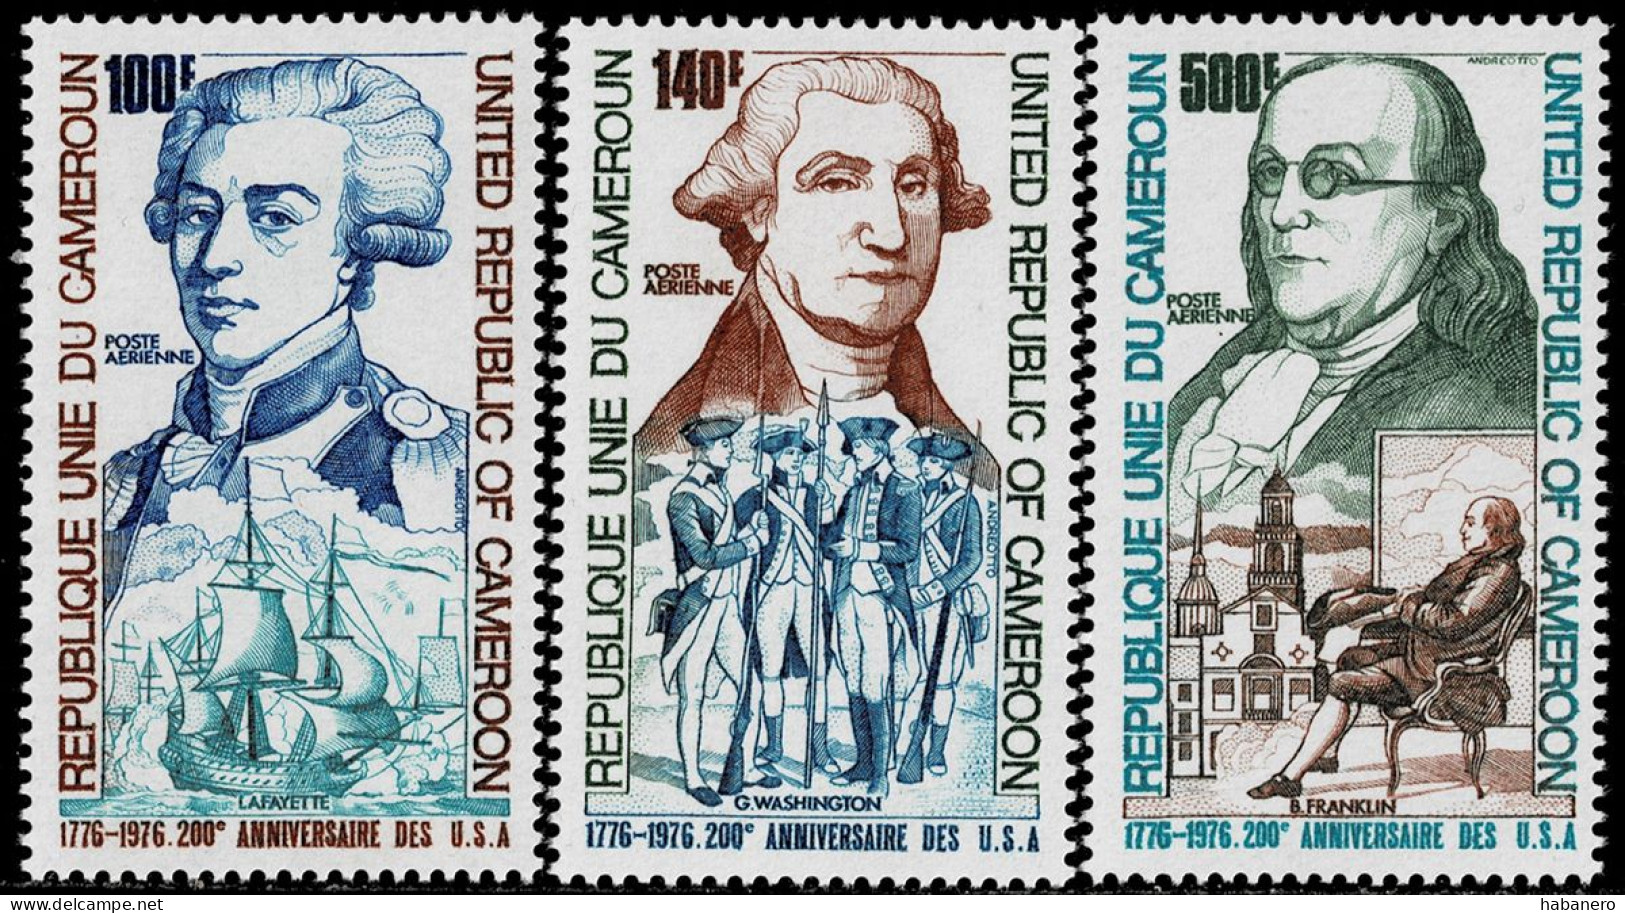 CAMEROON 1975 Mi 809-811 BICENTENARY OF AMERICAN REVOLUTION MINT STAMPS ** - Us Independence